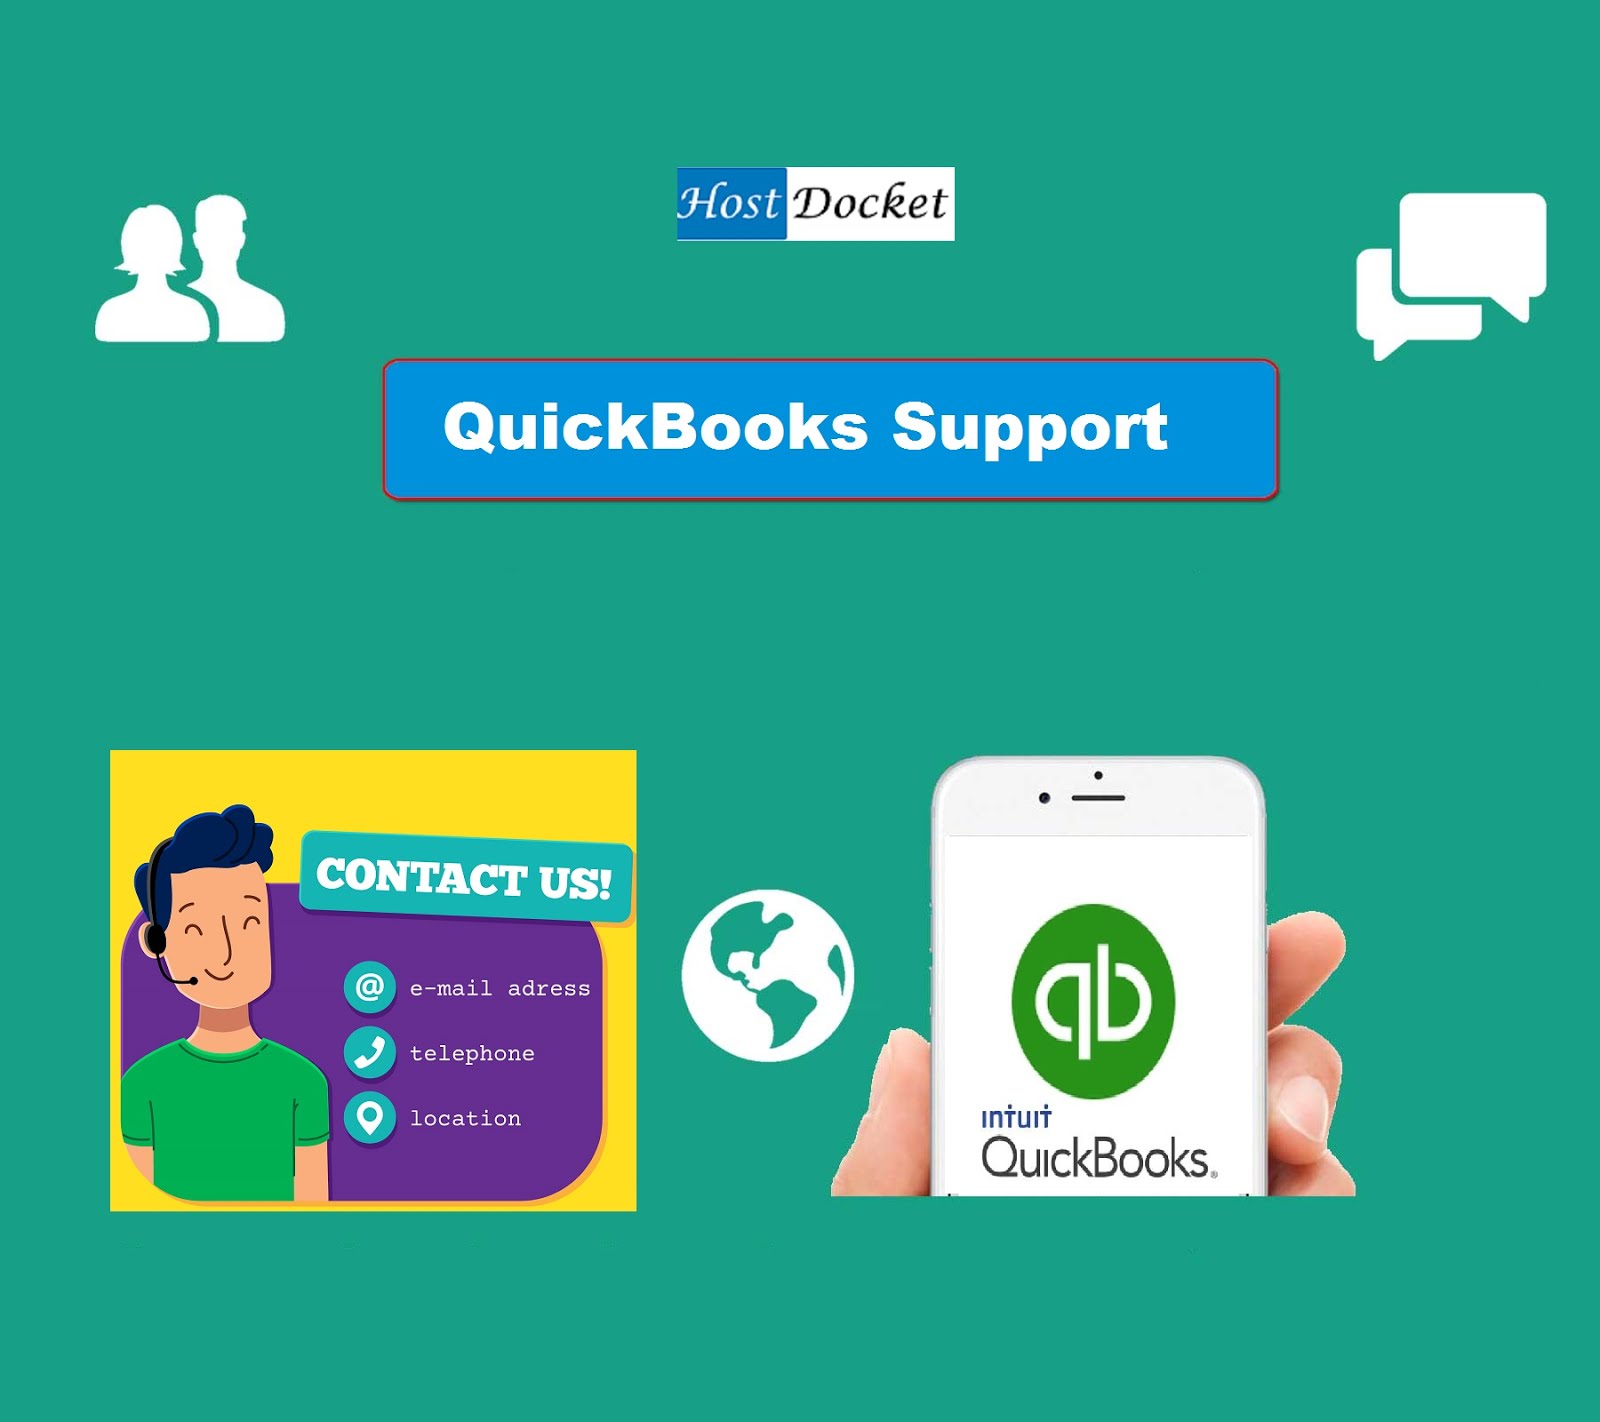 Get QuickBooks Software Services,Technical Help for Your Business Needs